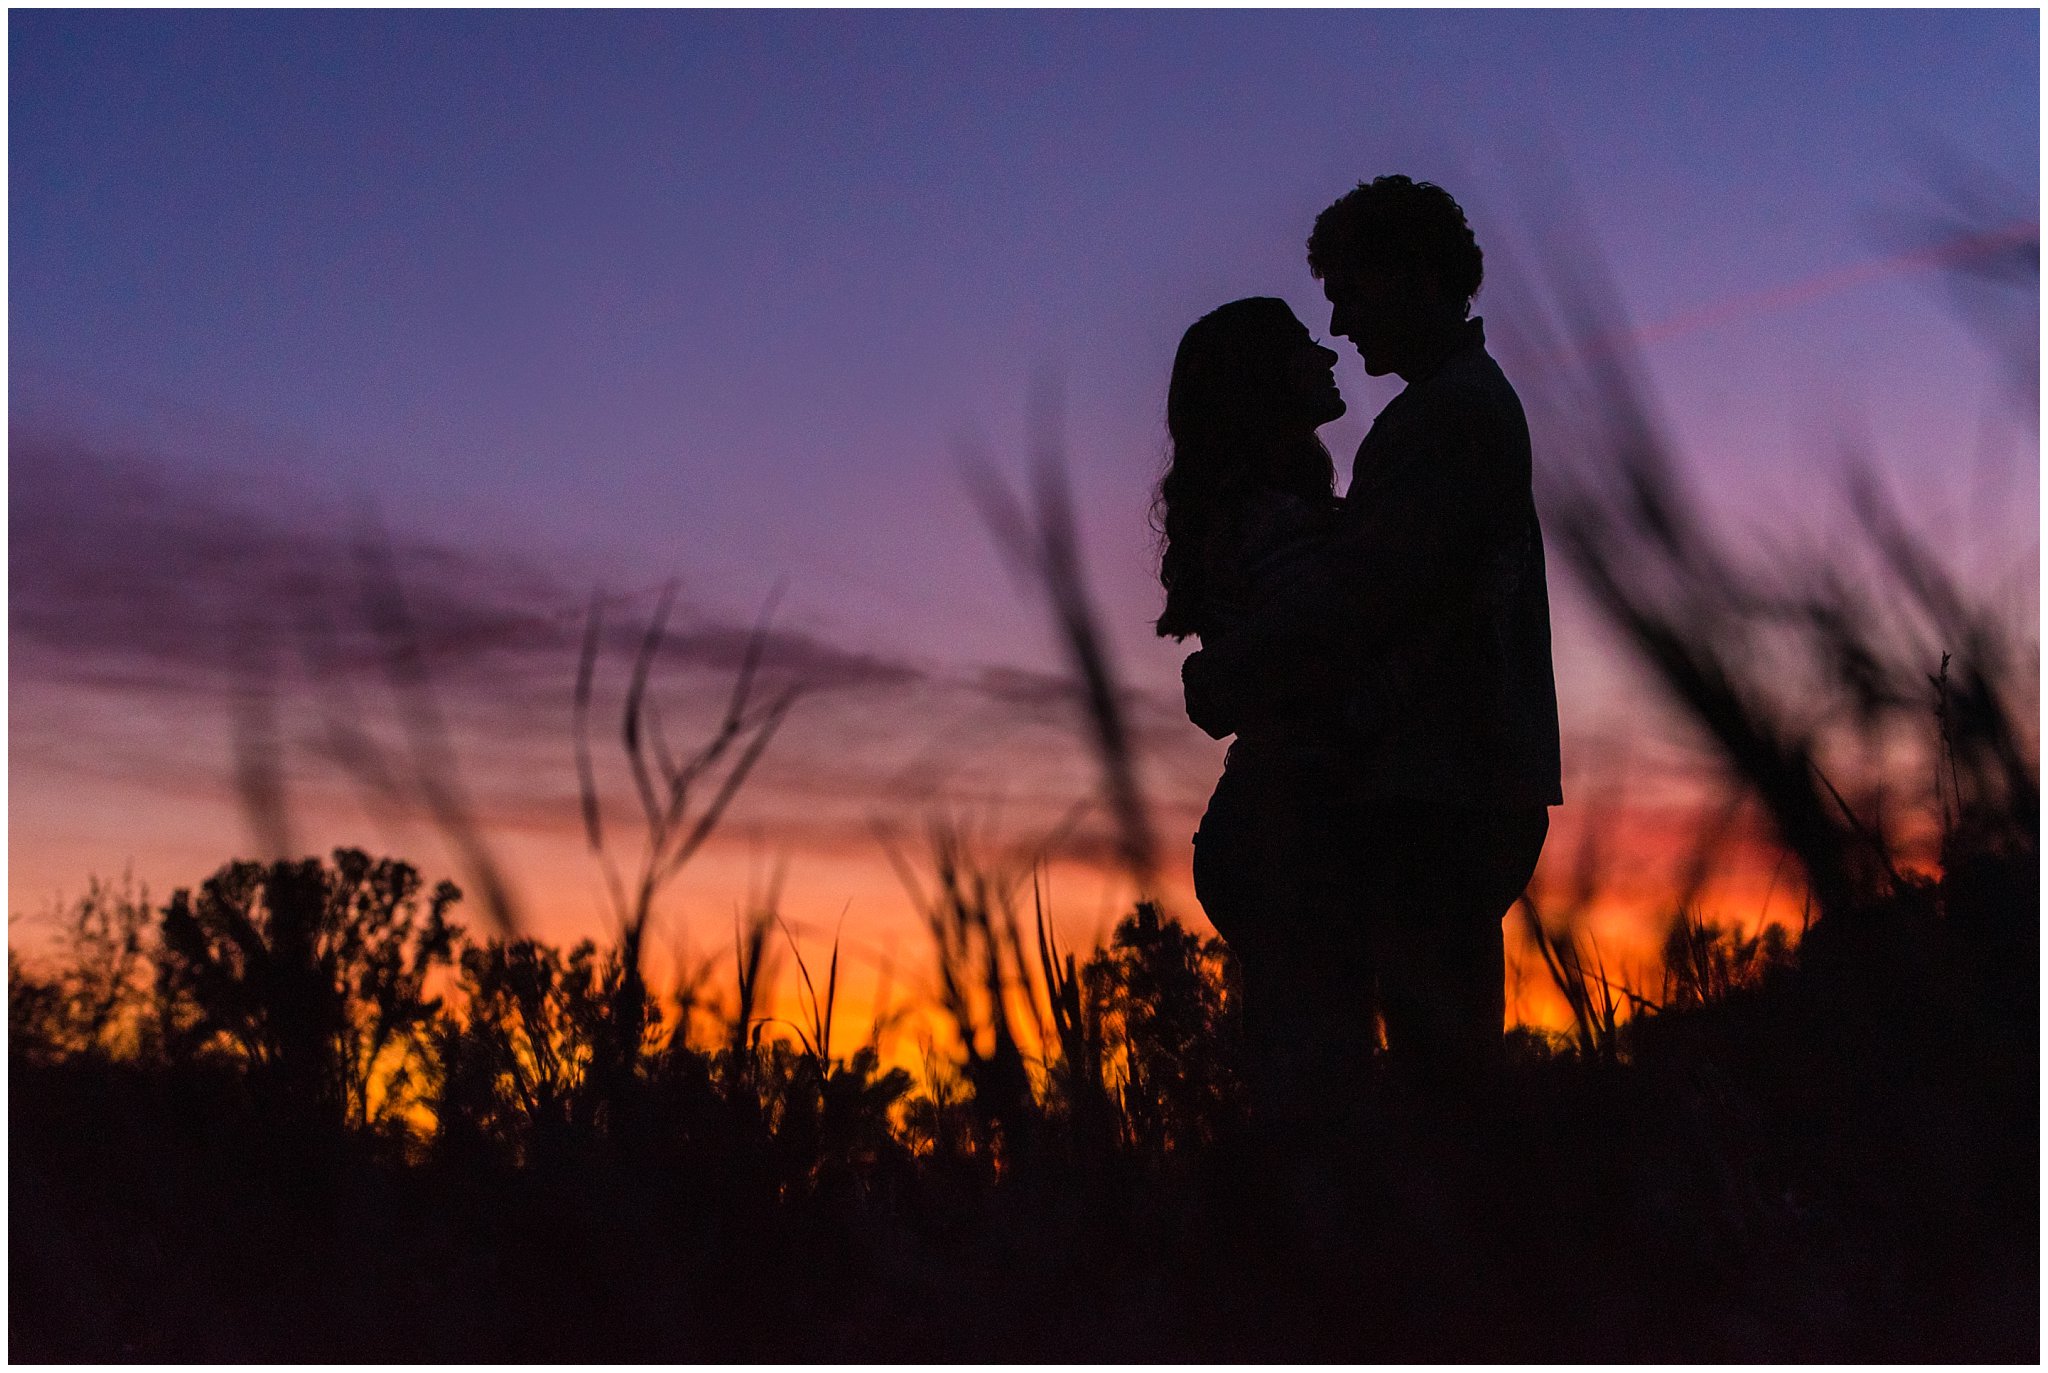 Candid photos of couple in casual cream colored fall sweaters with amazing sunset | Utah Fall Engagement Session in a Golden Field | Jessie and Dallin Photography